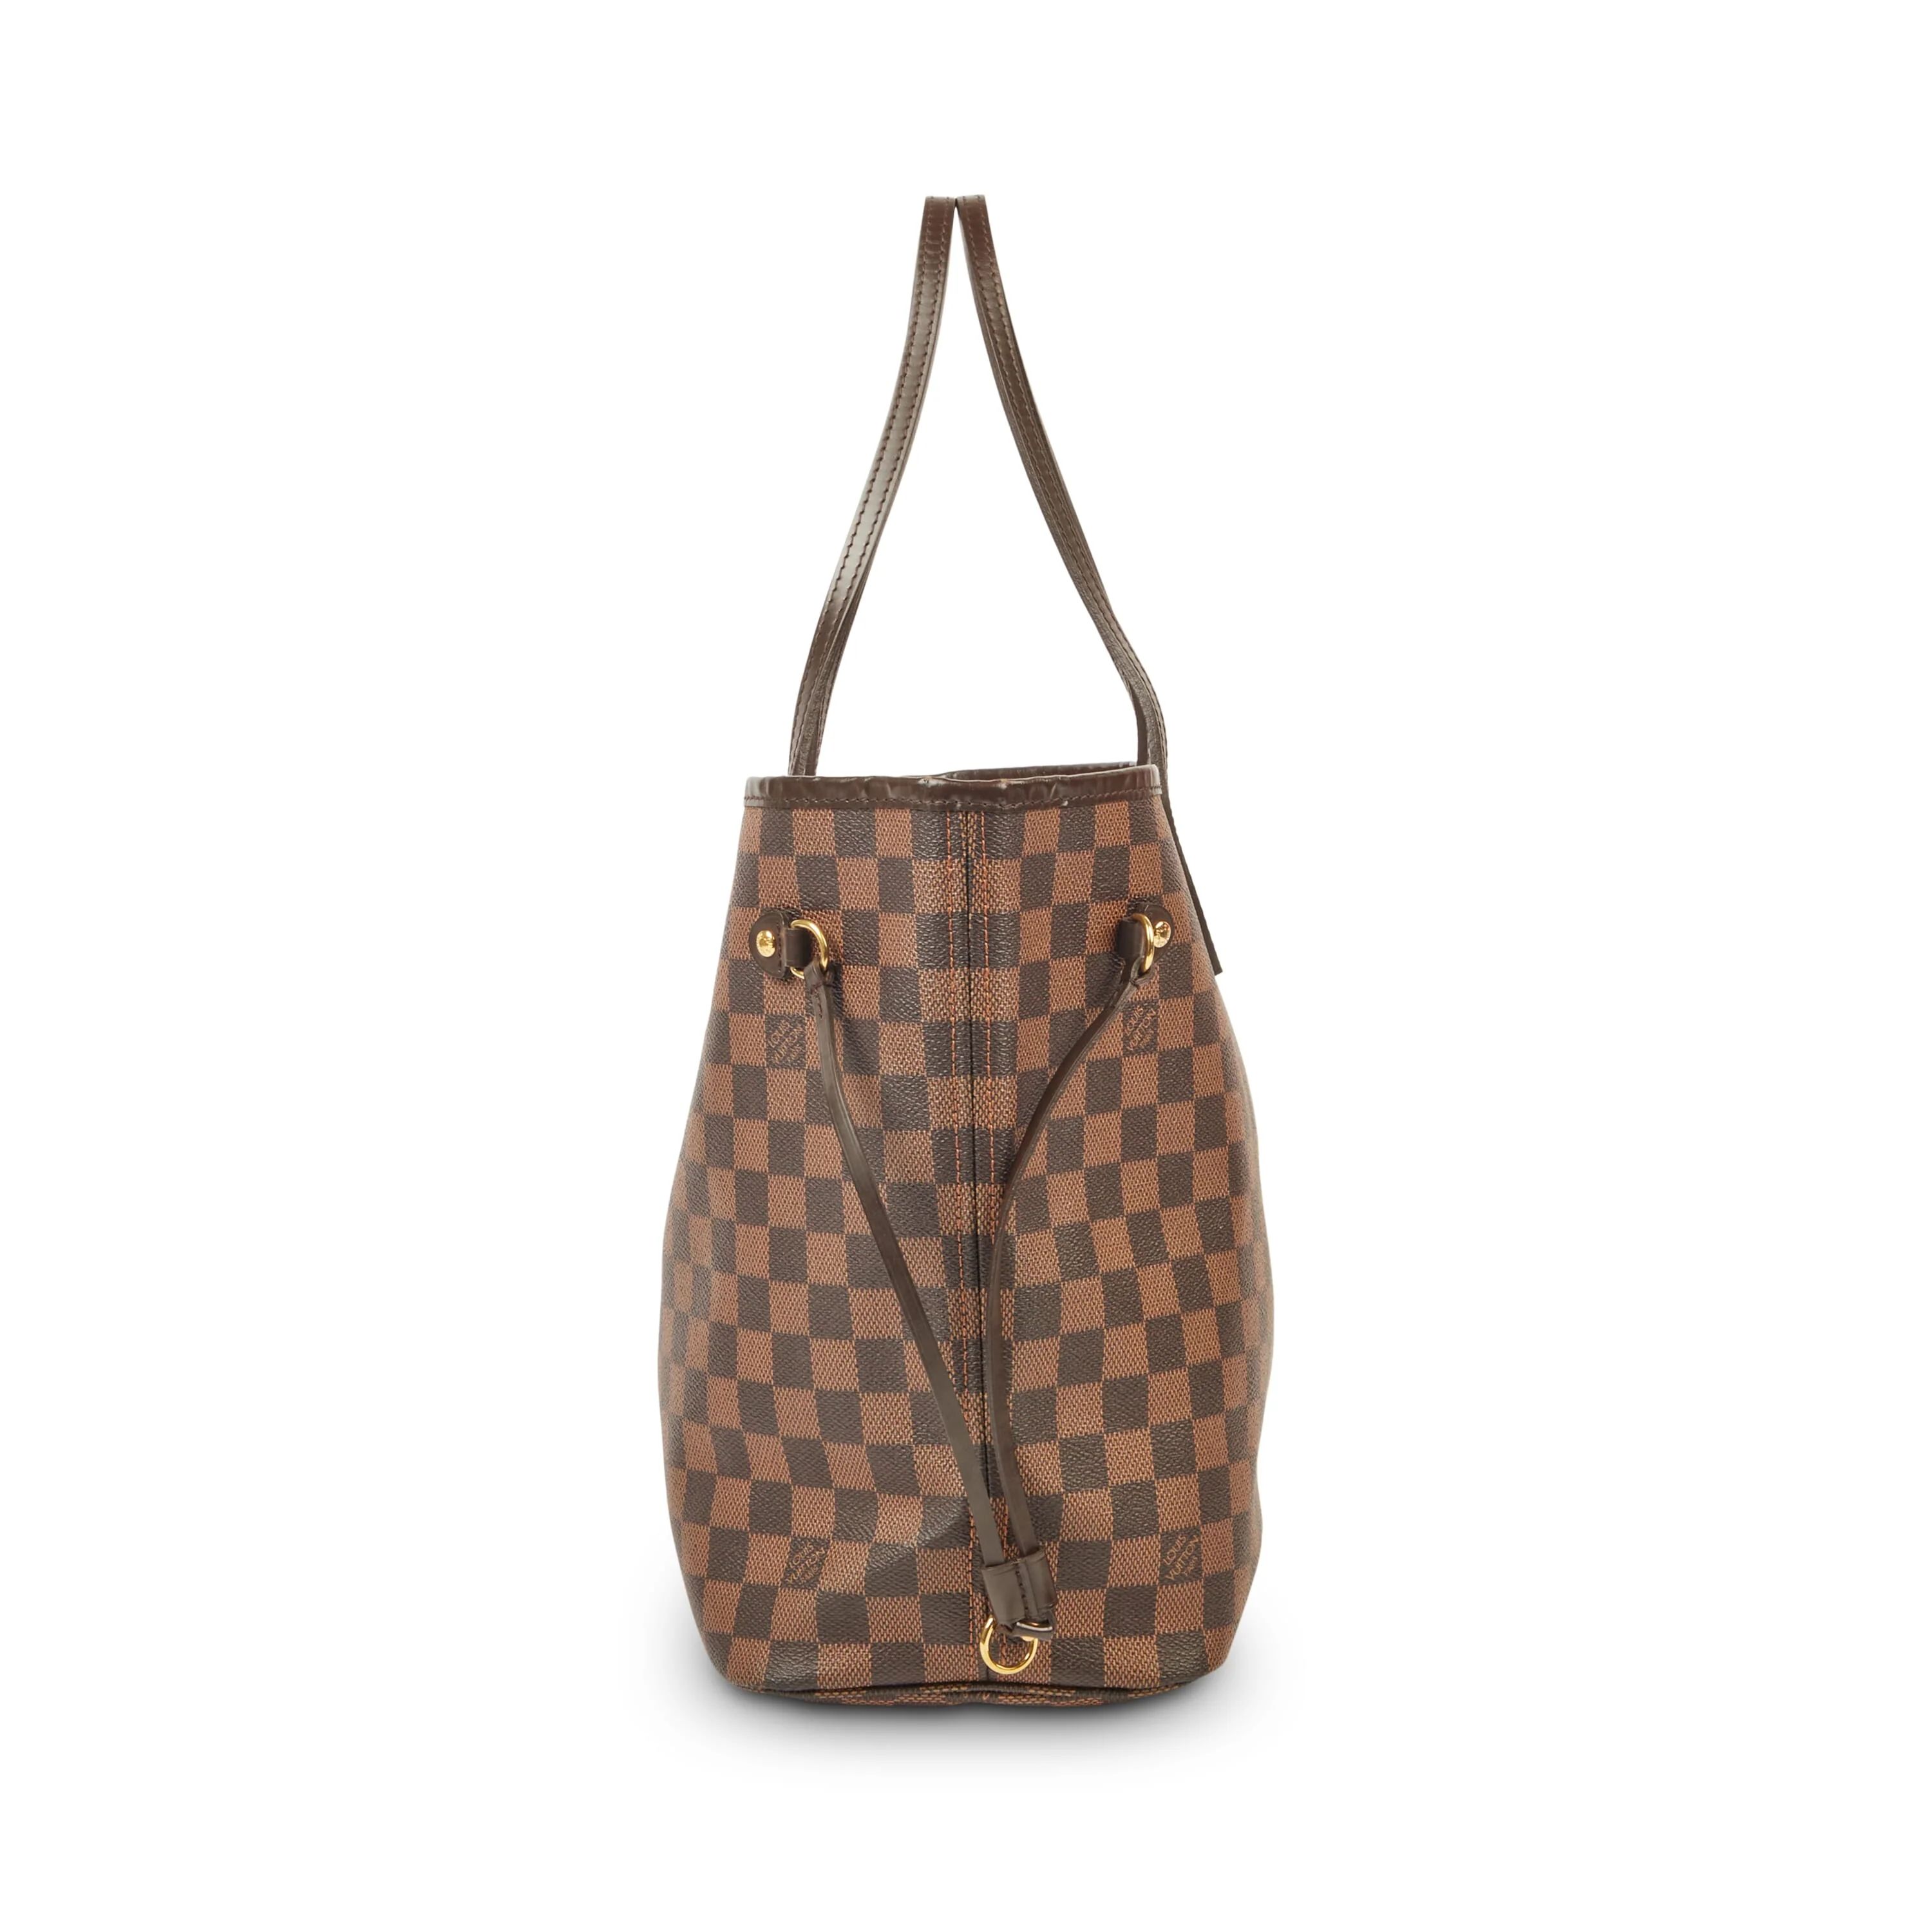 Louis Vuitton Neverfull Damier Ebene Tote Bag in Brown Lord & Taylor | Lord & Taylor